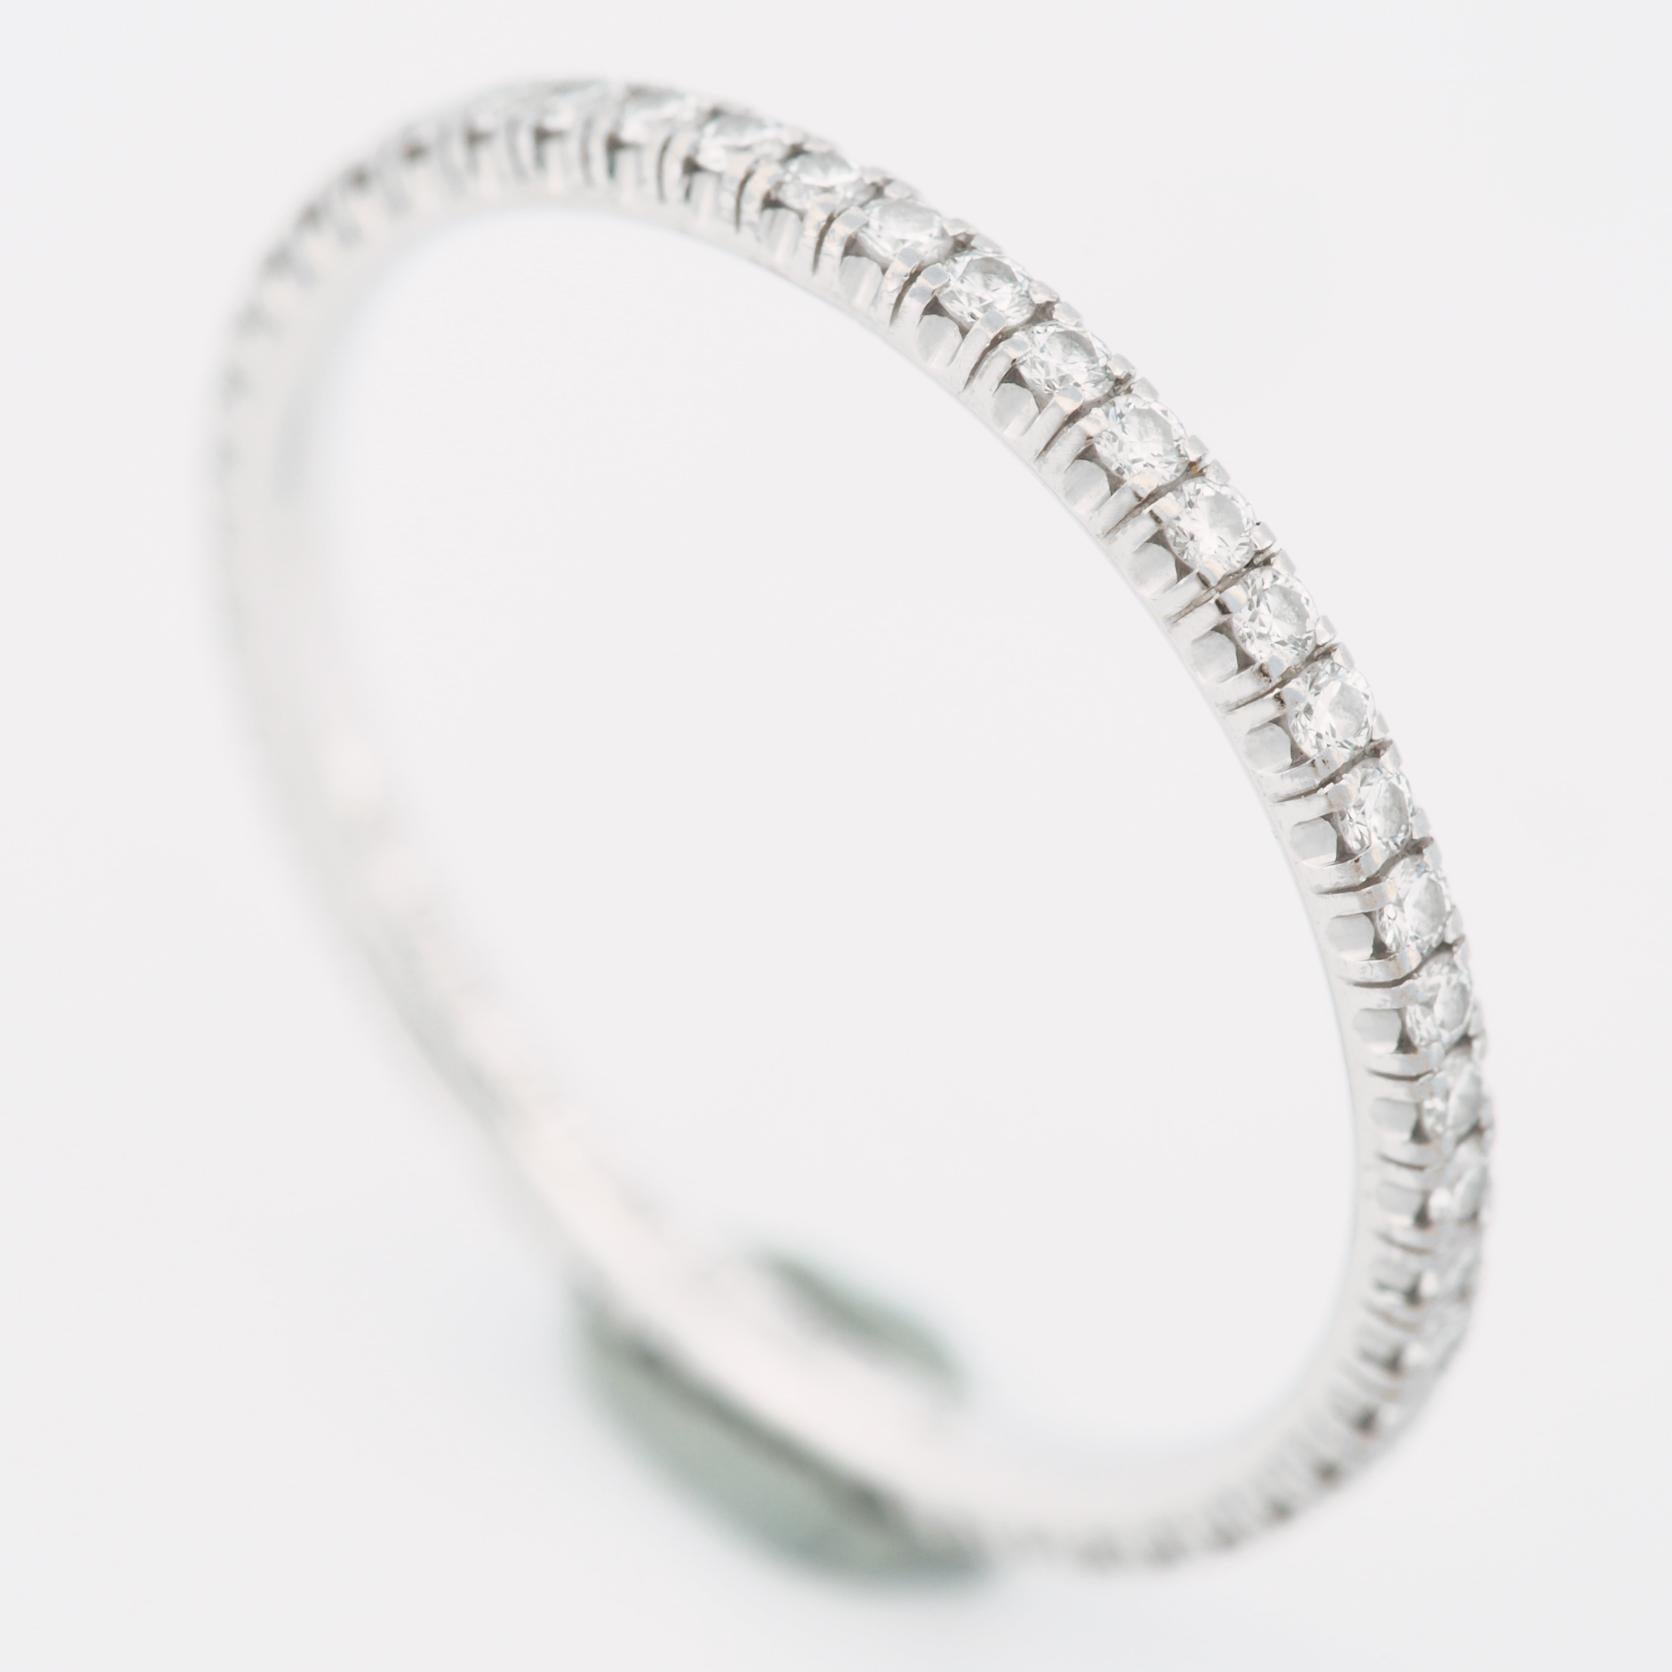 Item: Authentic Cartier Etincelle Eternity Diamonds Ring
Stones: Diamond ( 0.22ct )
Metal: 18K White Gold
Ring Size: 51 US SIZE 5.5 UK SIZE K 1/4
Internal Diameter: 16.15 mm
Measurement: 1.5 mm width
Weight: 1.3 Grams
Condition: Used